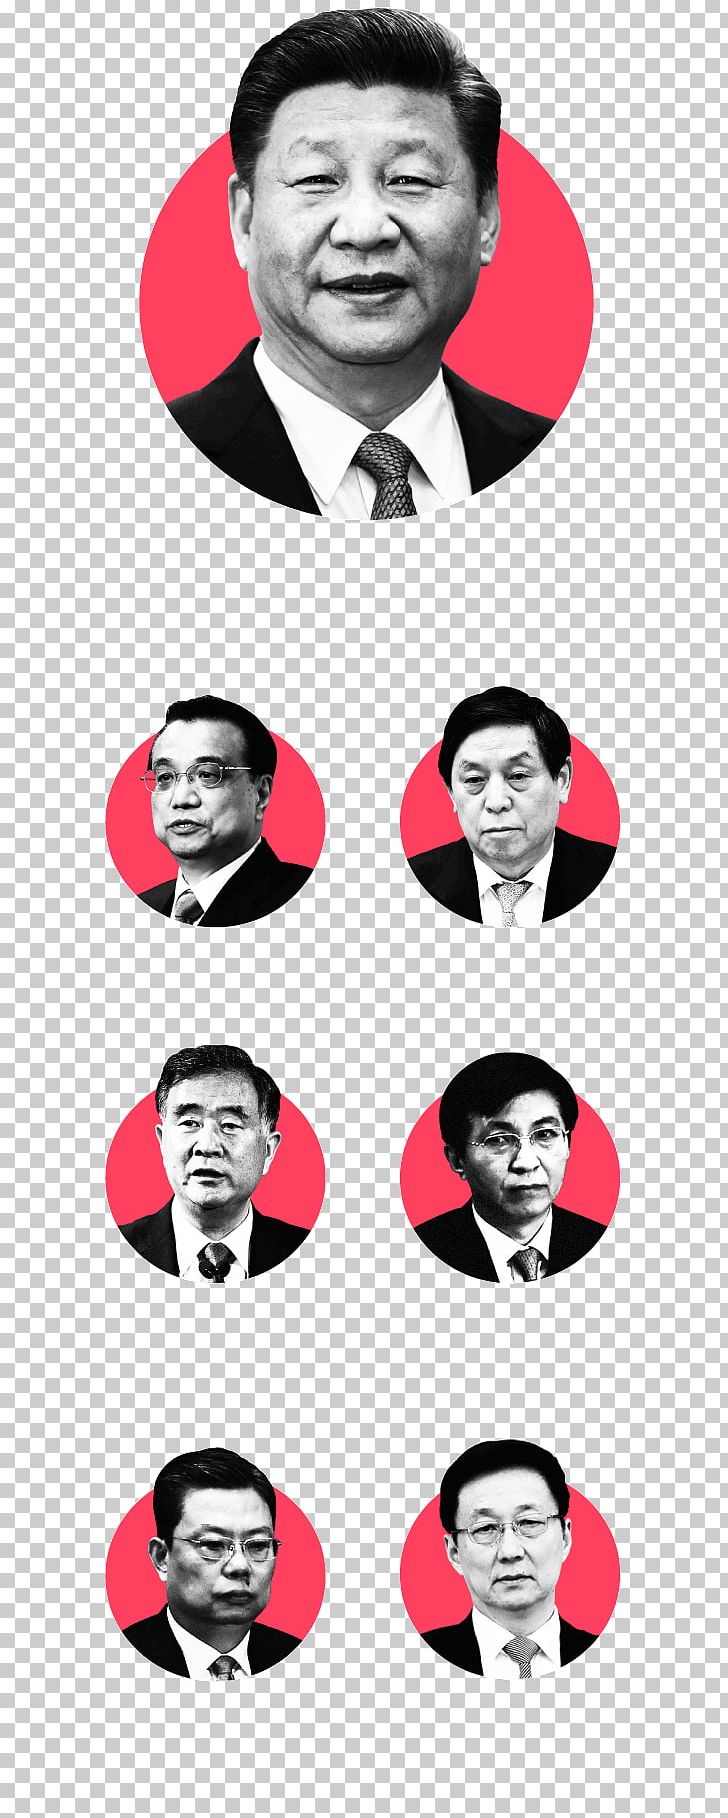 Li Keqiang 19th National Congress Of The Communist Party Of China 12th National People's Congress PNG, Clipart, 19th, Li Keqiang Free PNG Download